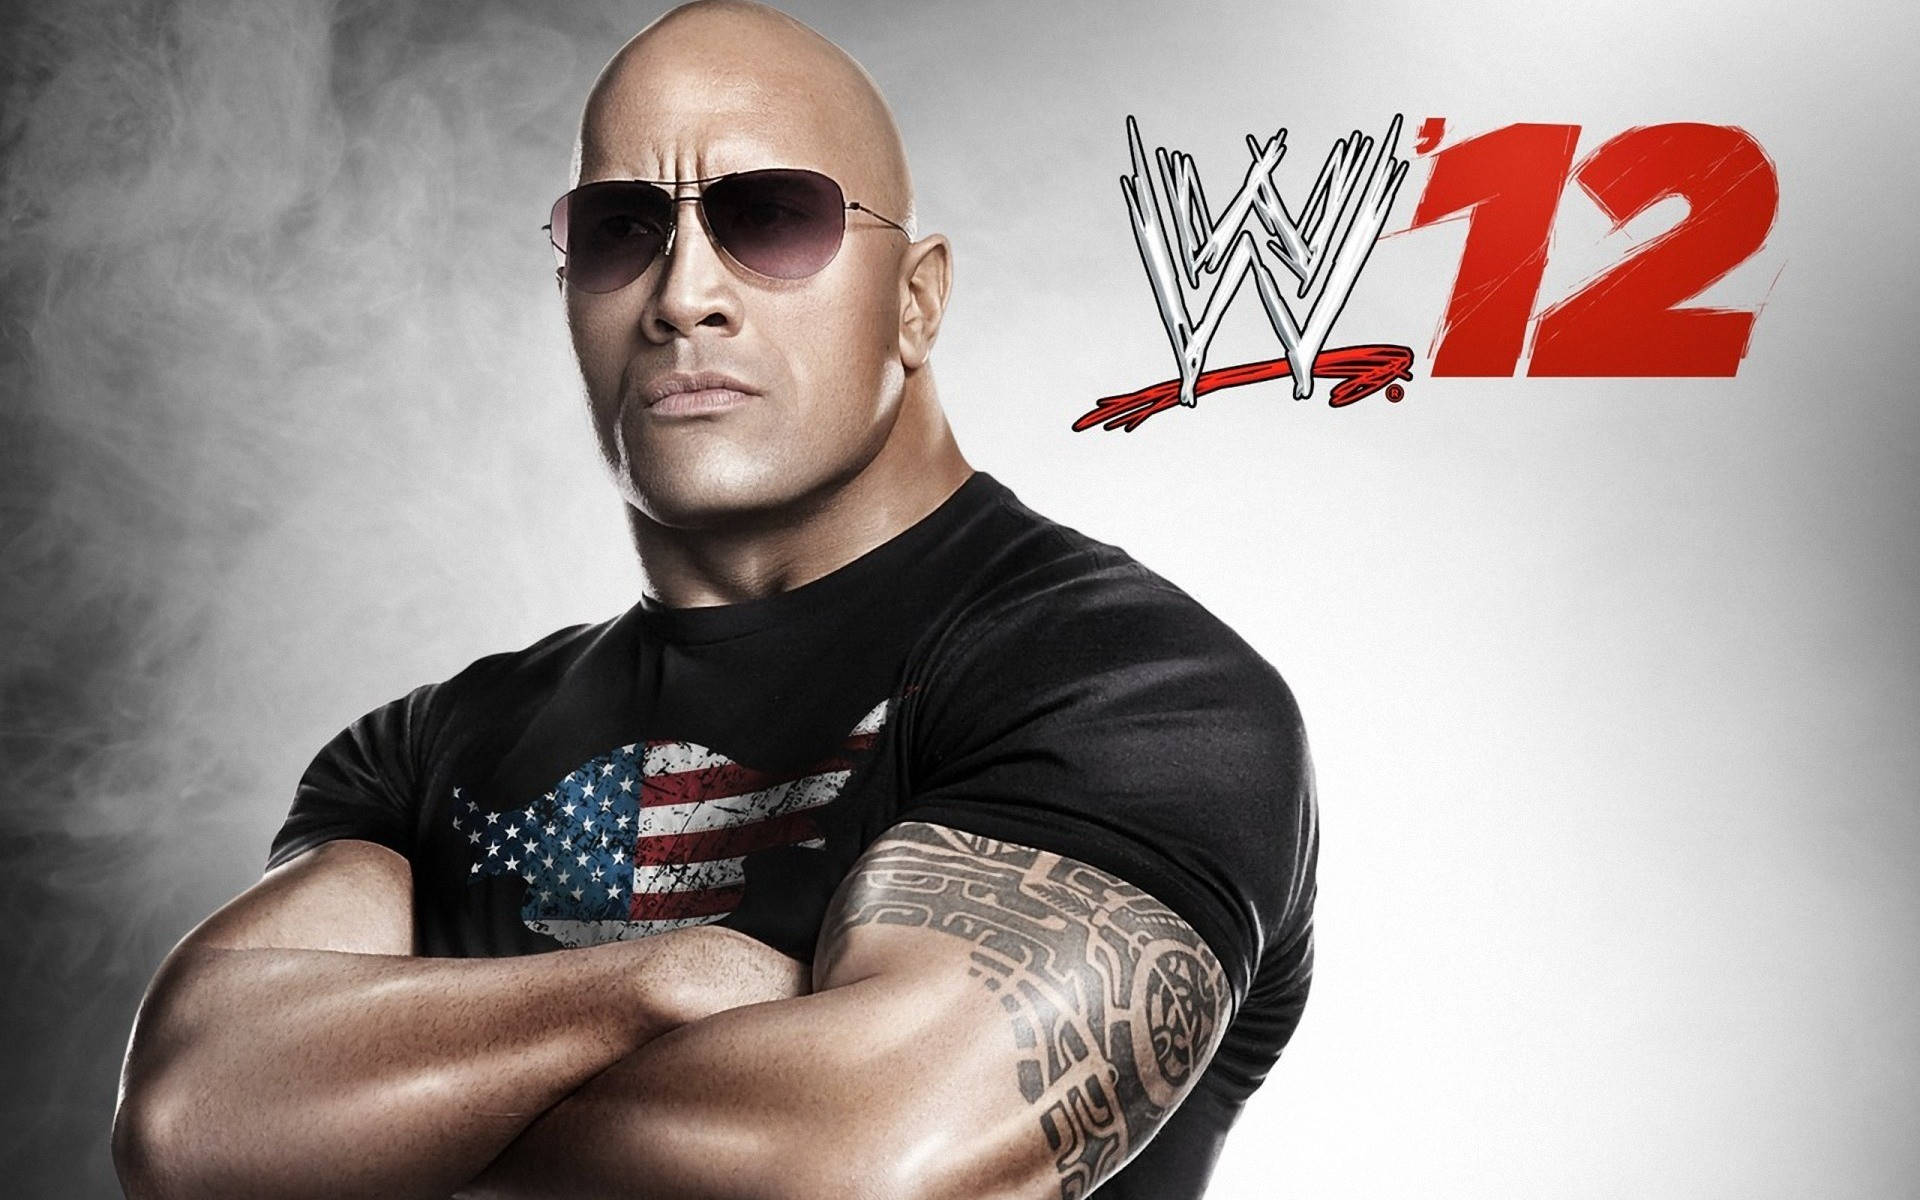 Free The Rock Wallpaper Downloads, [100+] The Rock Wallpapers for FREE |  